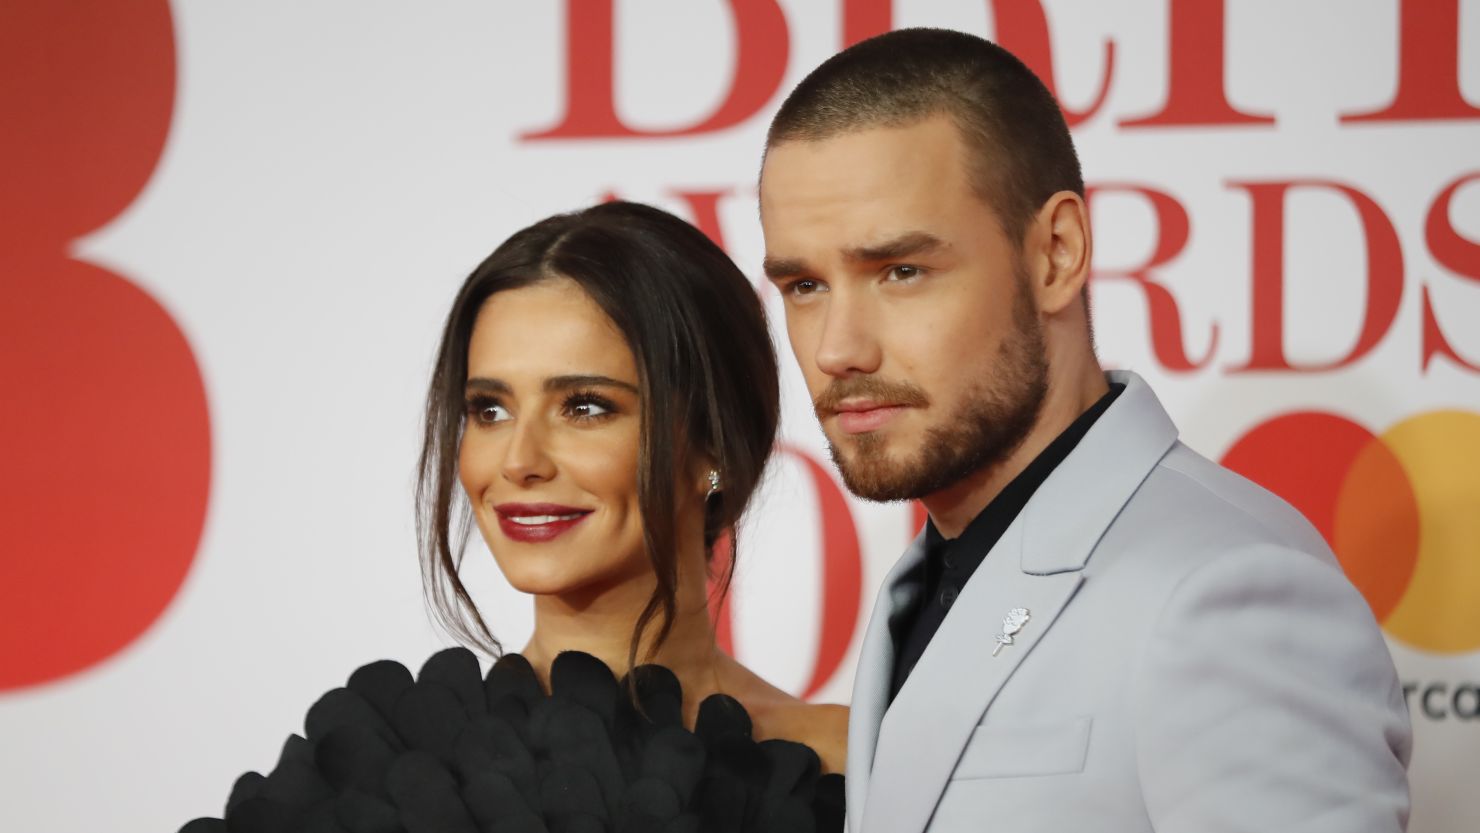 British singer-songwriter Liam Payne and partner Cheryl pose on the red carpet on arrival for the BRIT Awards 2018 in London on February 21, 2018.